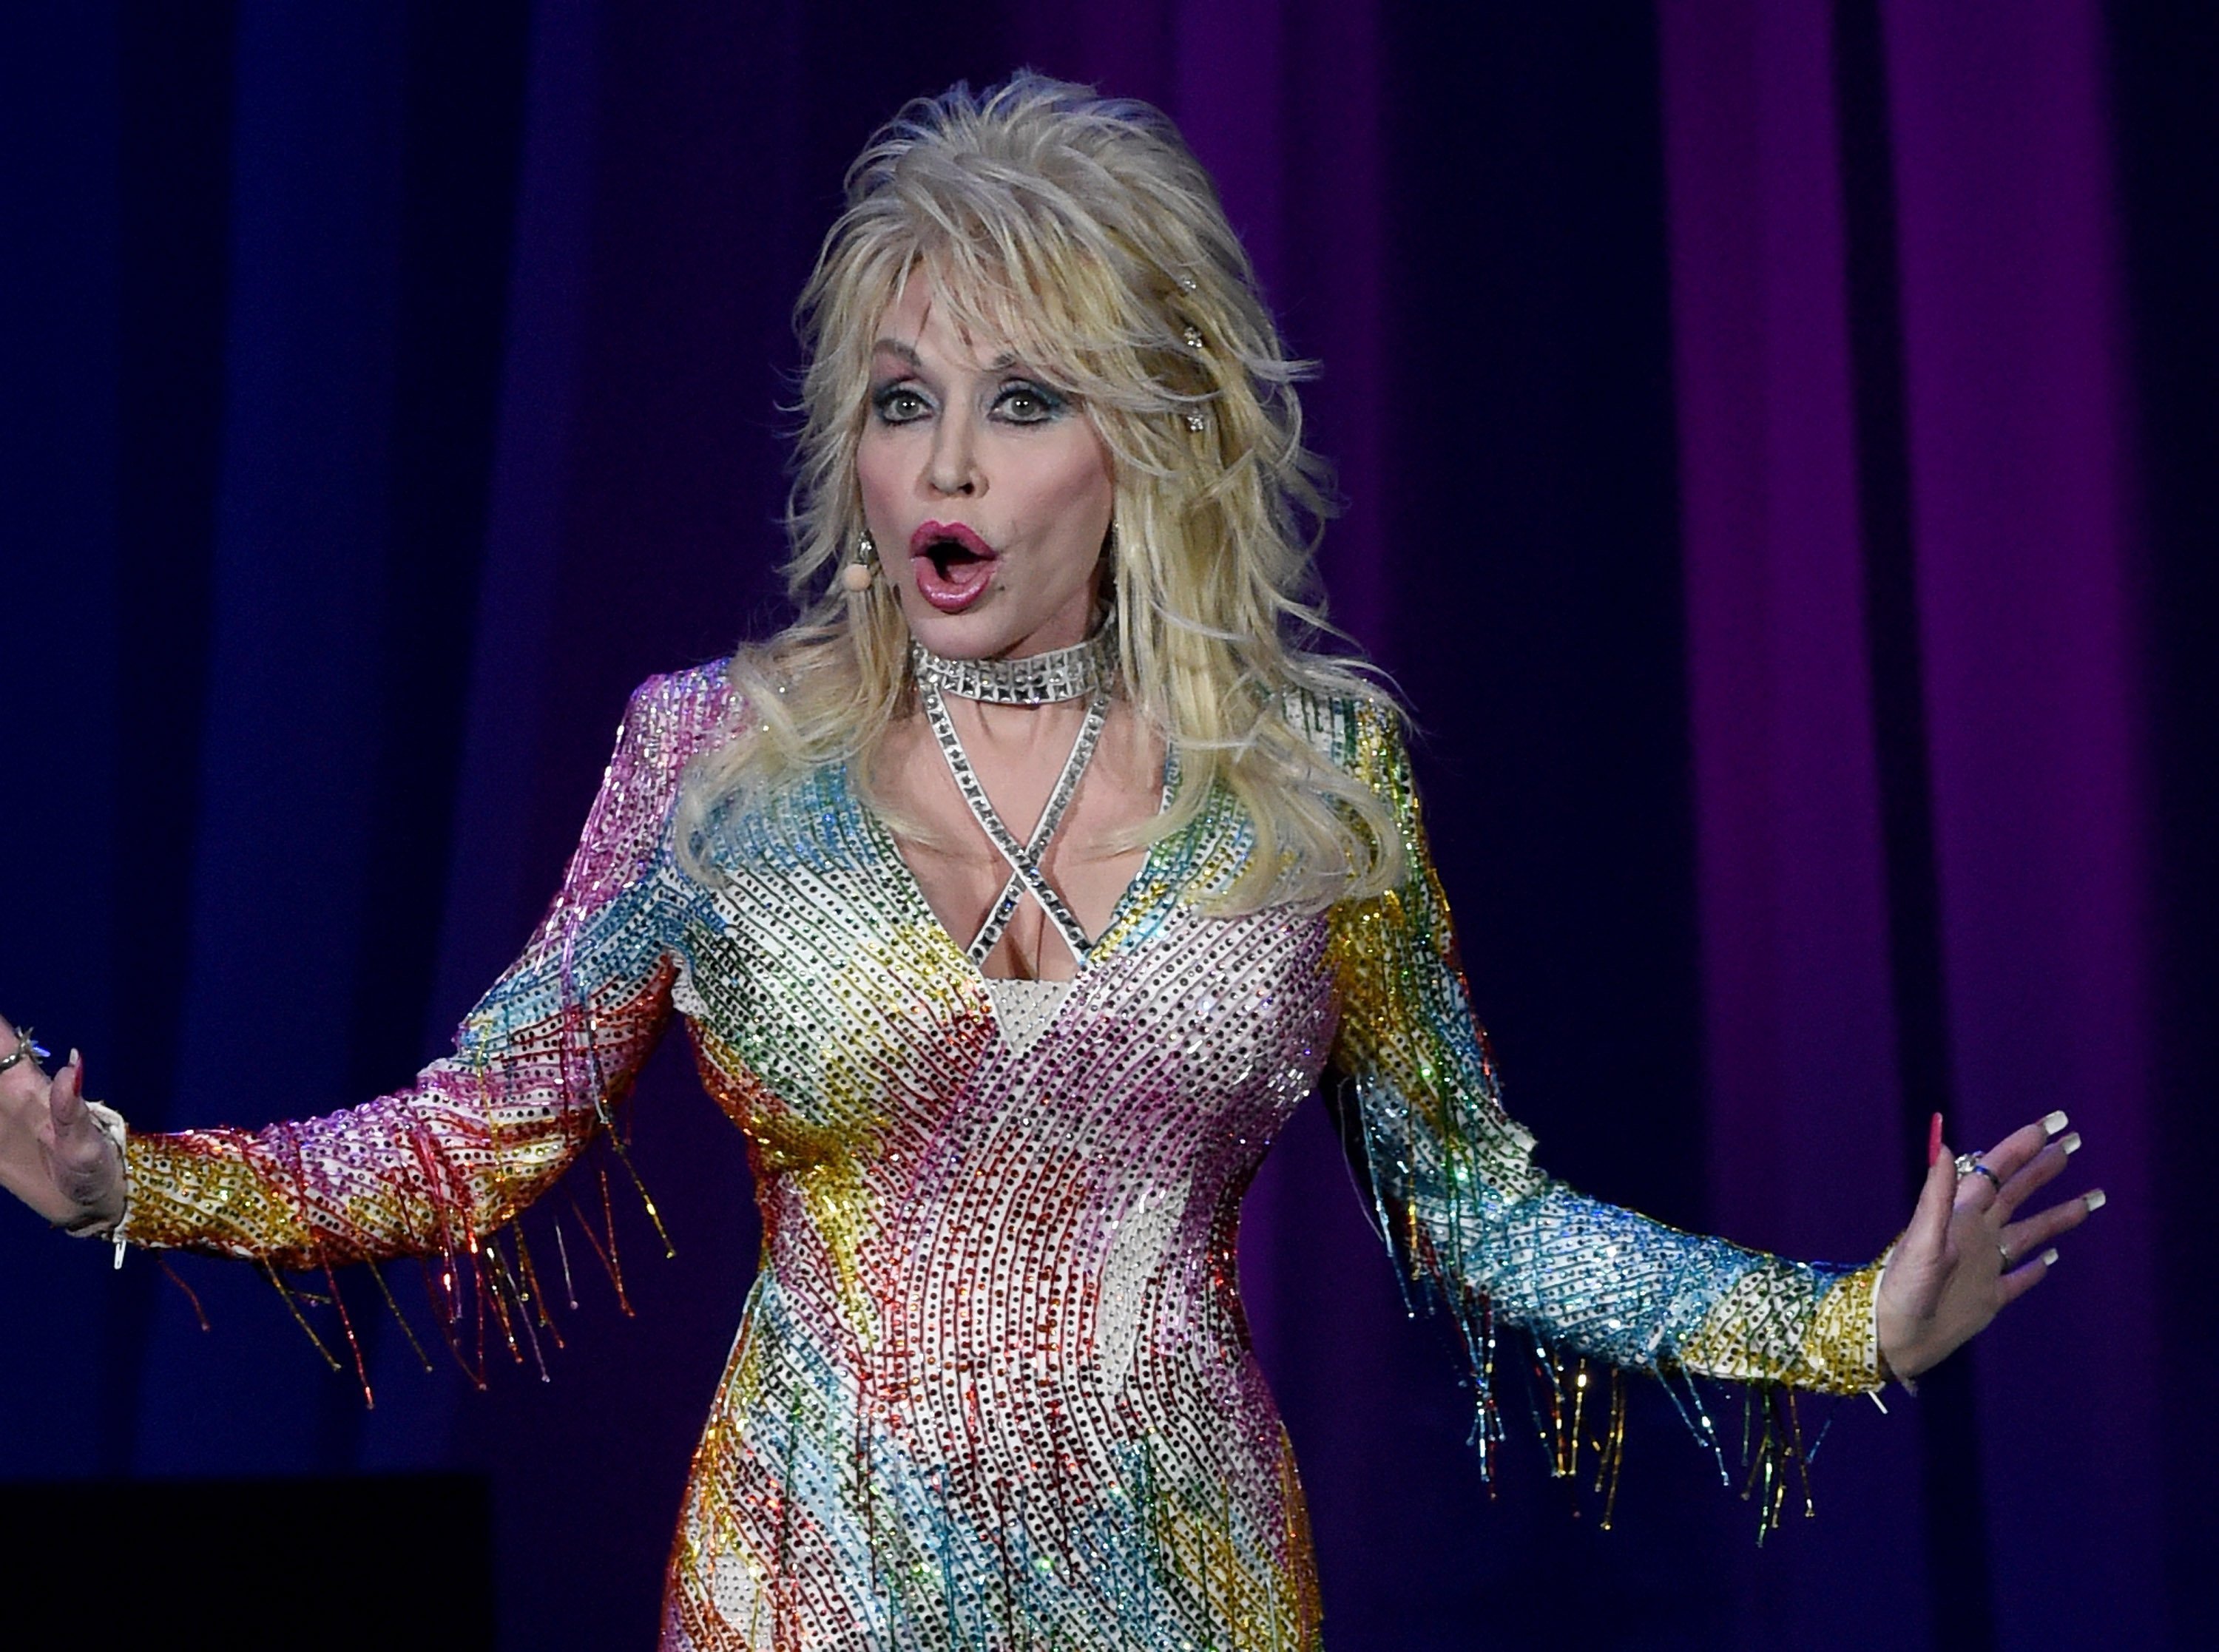 Dolly Parton attends Pure & Simple benefiting The Opry Trust Fund at Ryman Auditorium on August 1, 2015 in Nashville, Tennessee. | Photo: Getty Images.